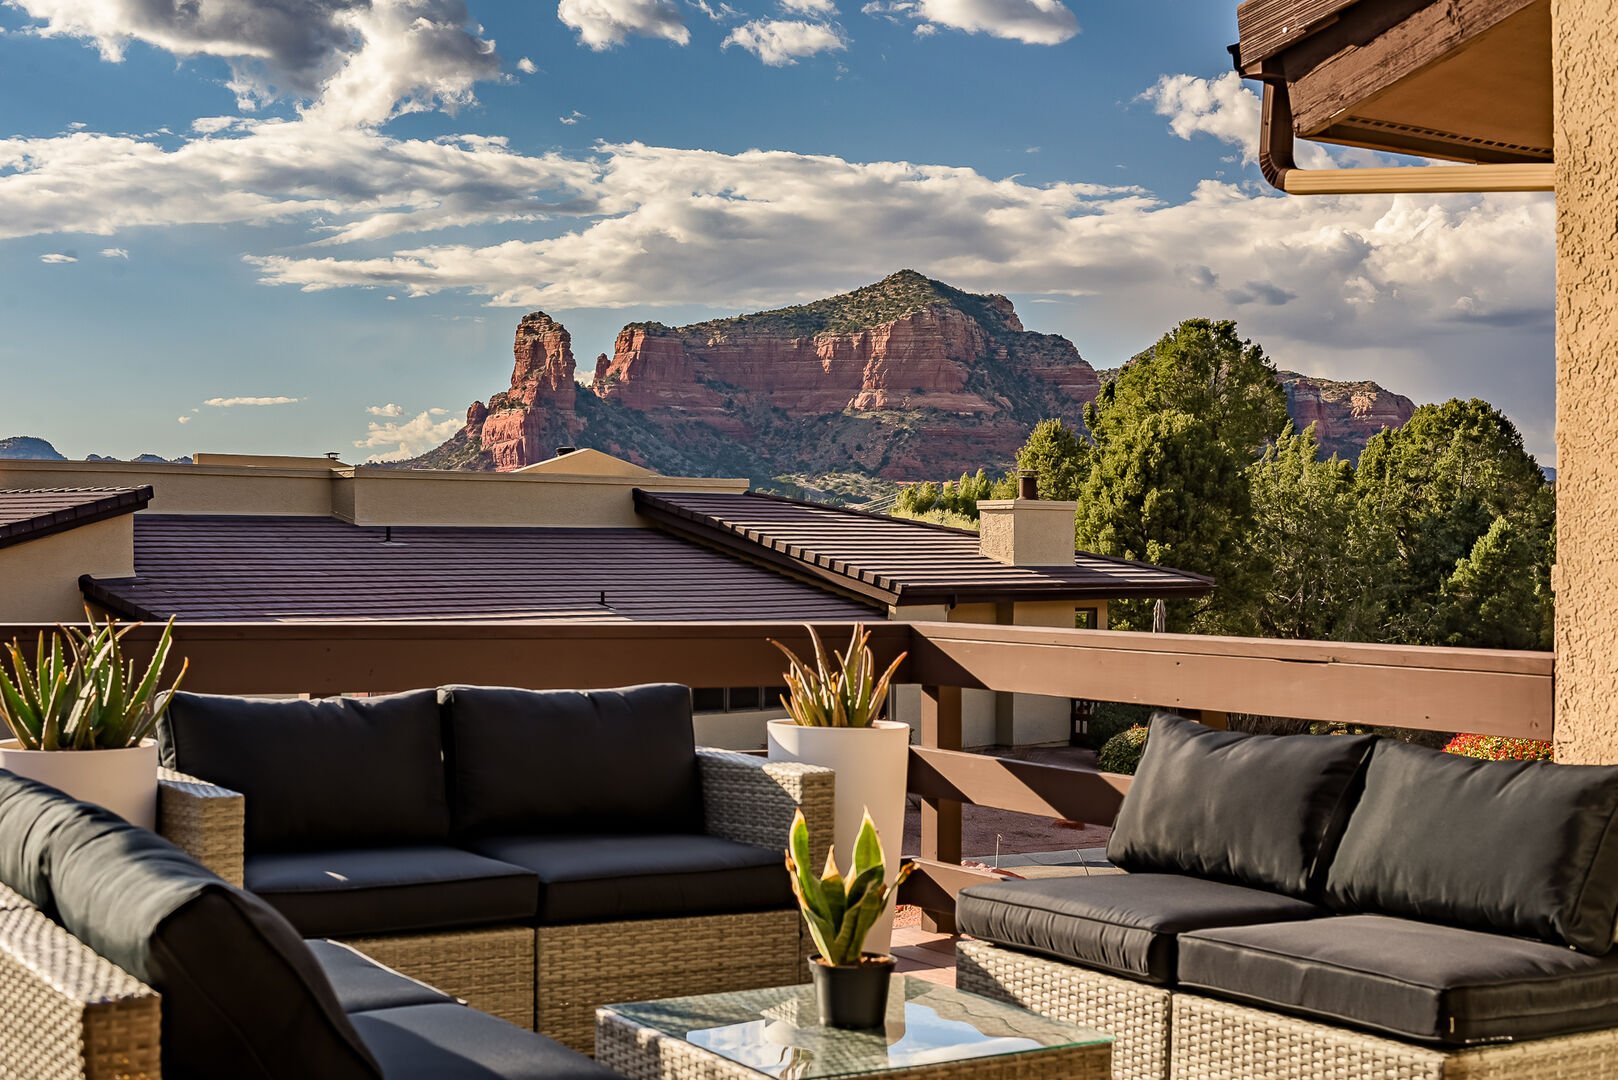 Outdoor Seating Area to Enjoy While Taking in Red Rock Views!